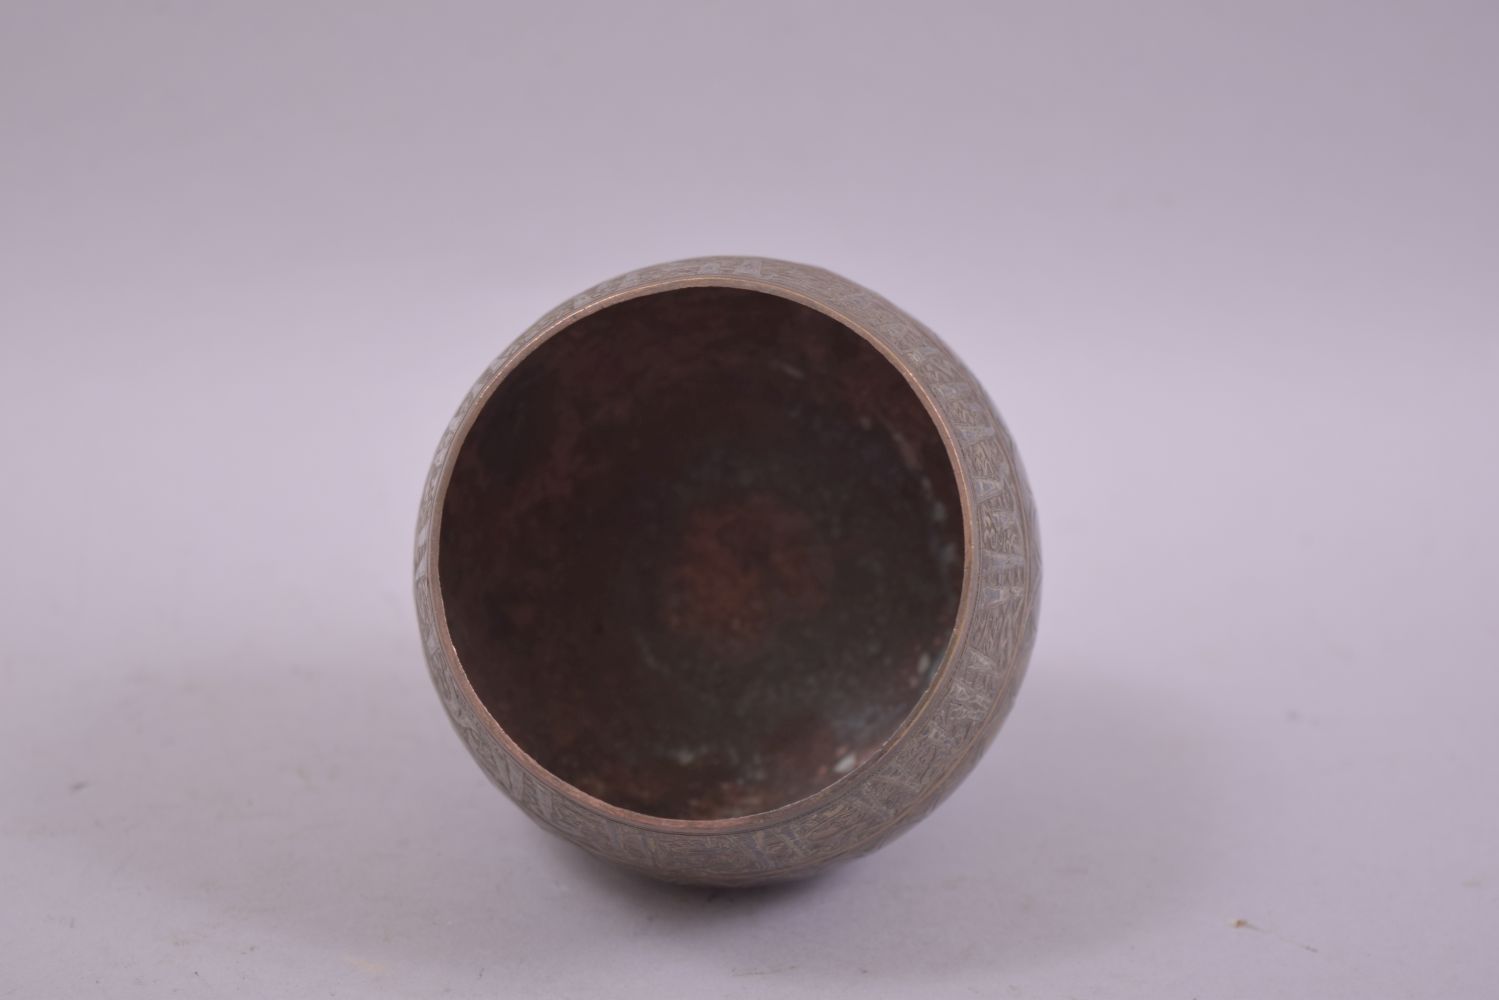 A FINE ISLAMIC SMALL BRASS SILVER AND COPPER OVERLAID GOBLET, 8.5cm high. - Image 5 of 6